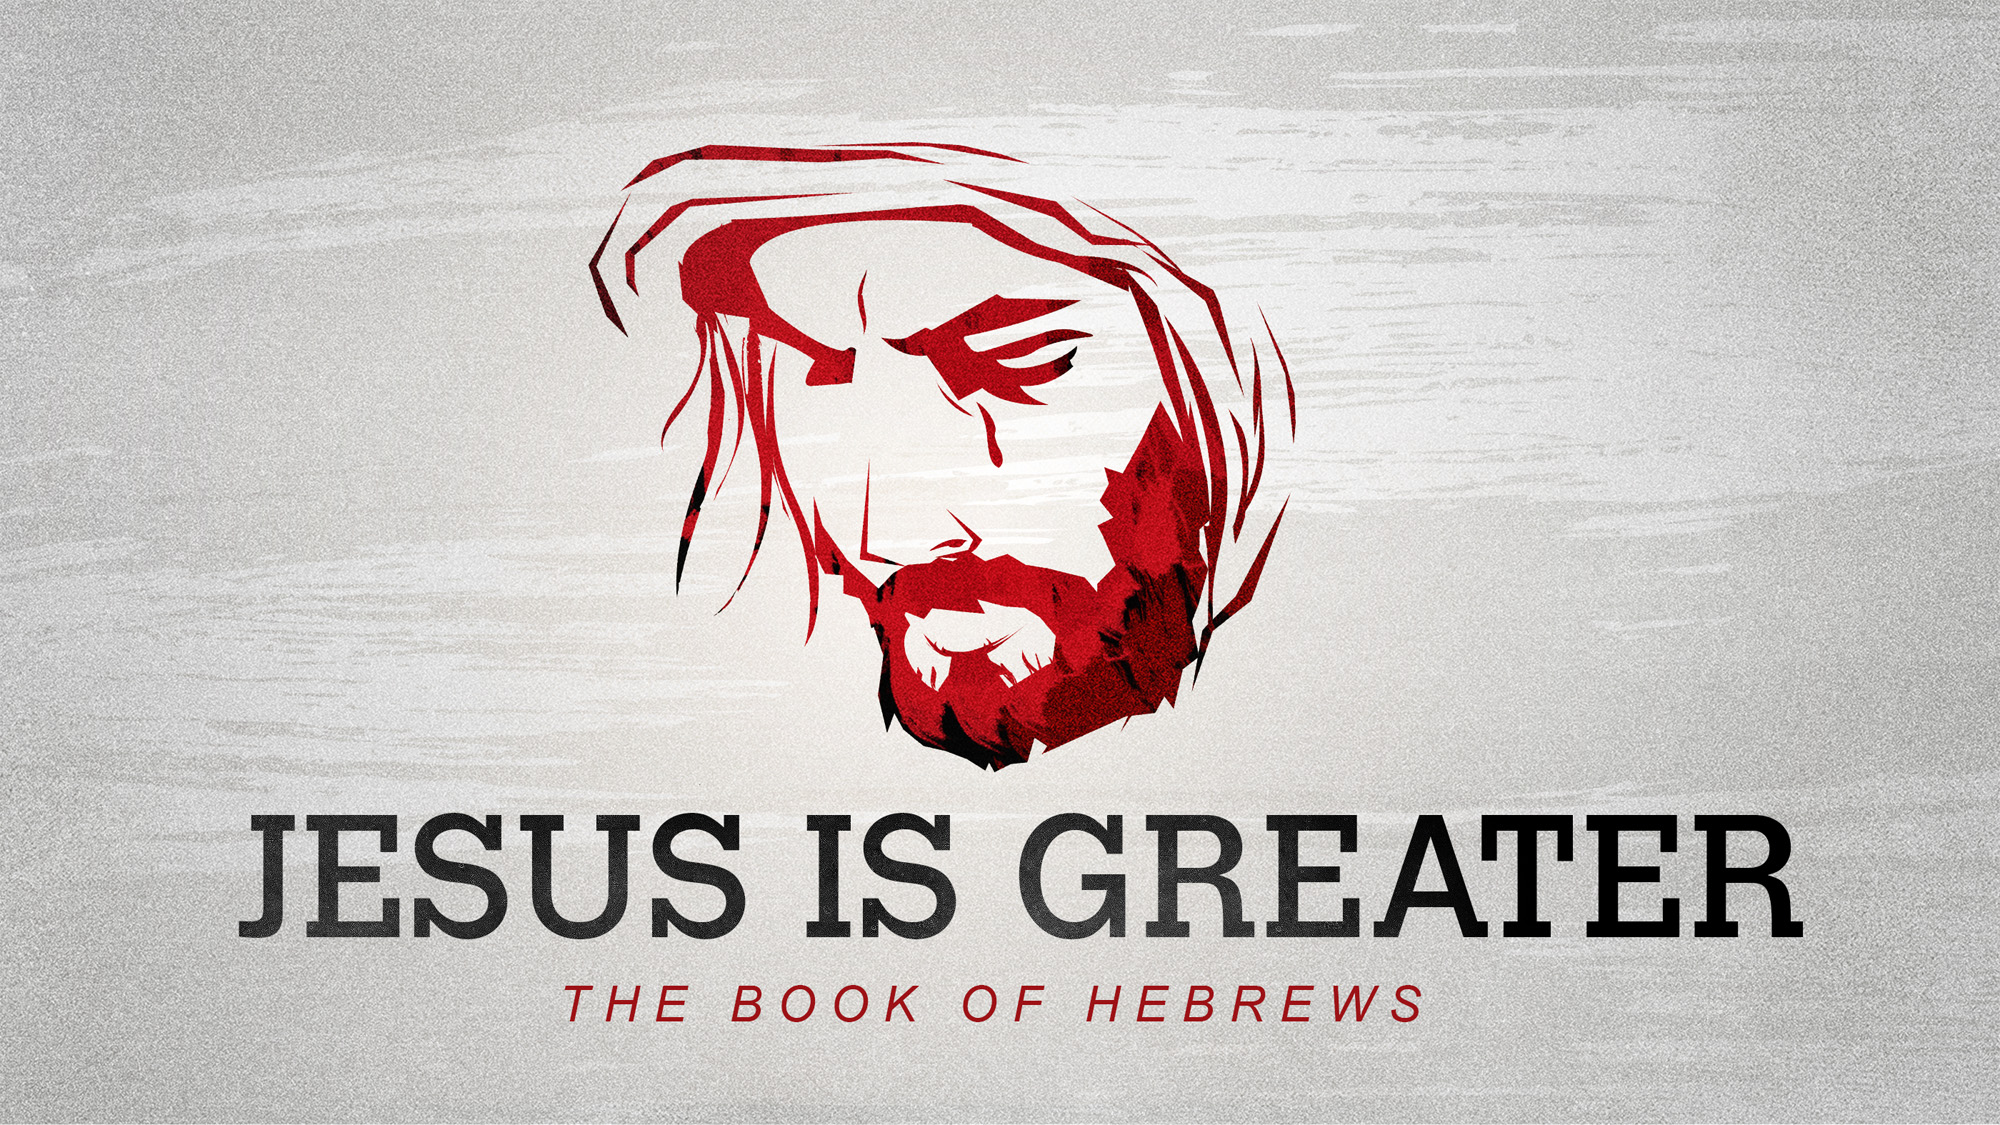 Jesus is Greater than Your Greatest Effort